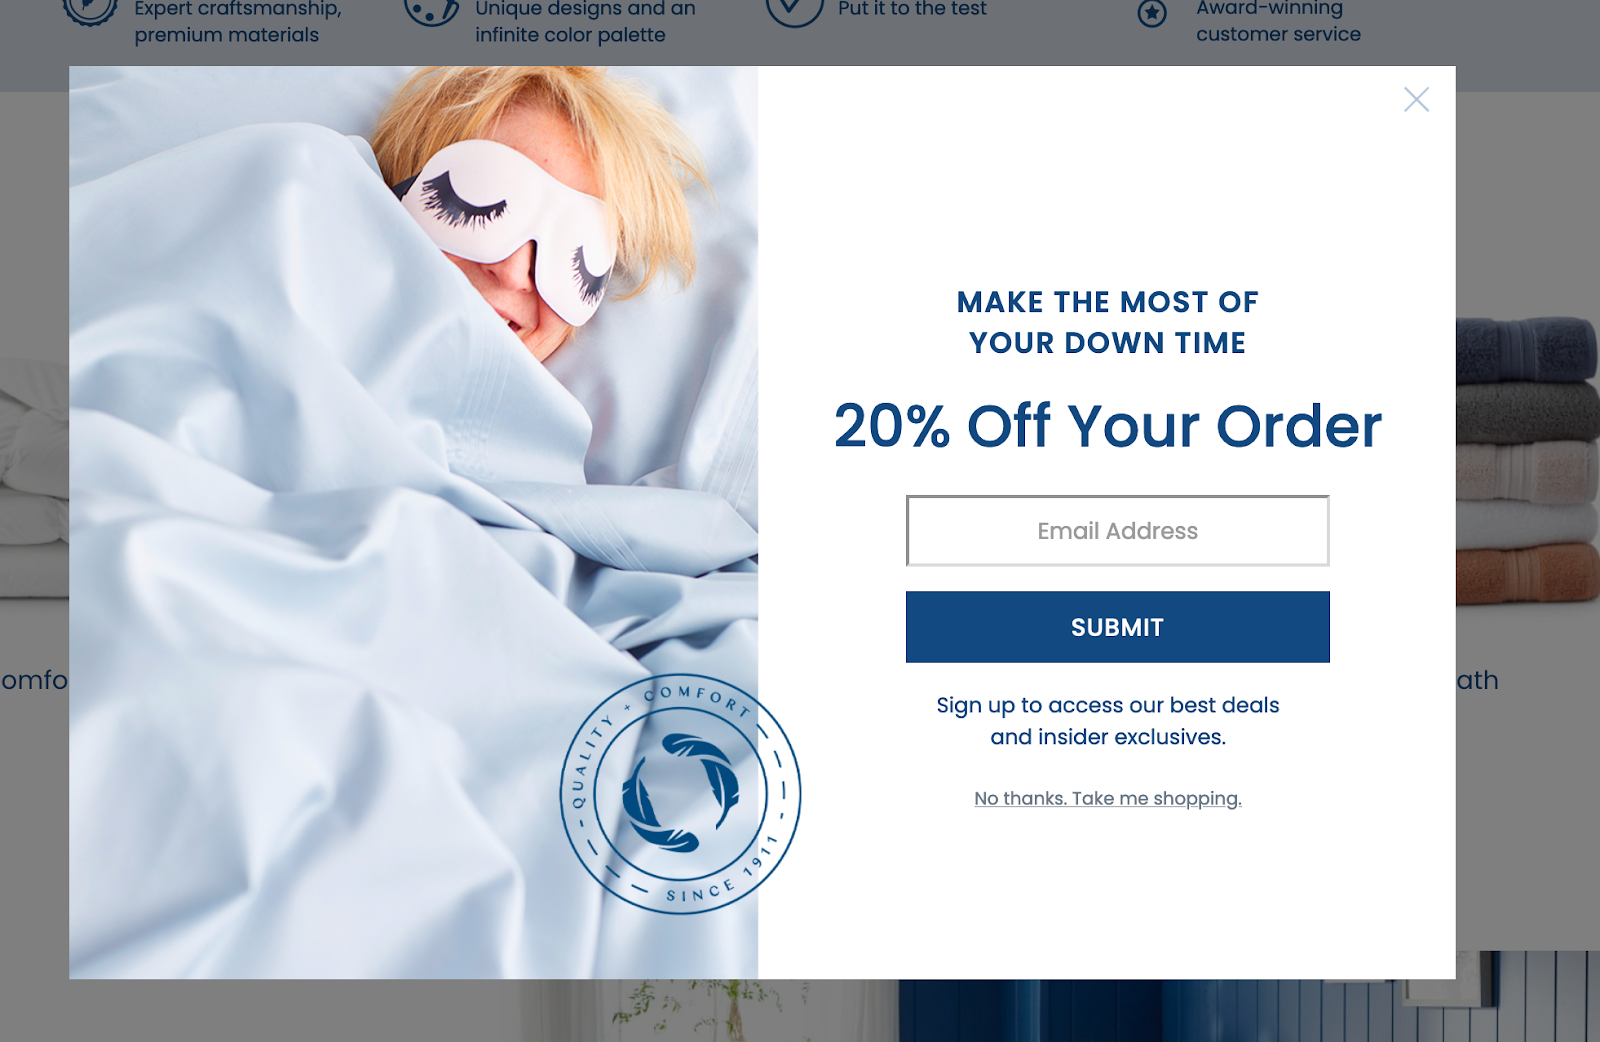 ecommerce store offers discount code for subscribing to email list